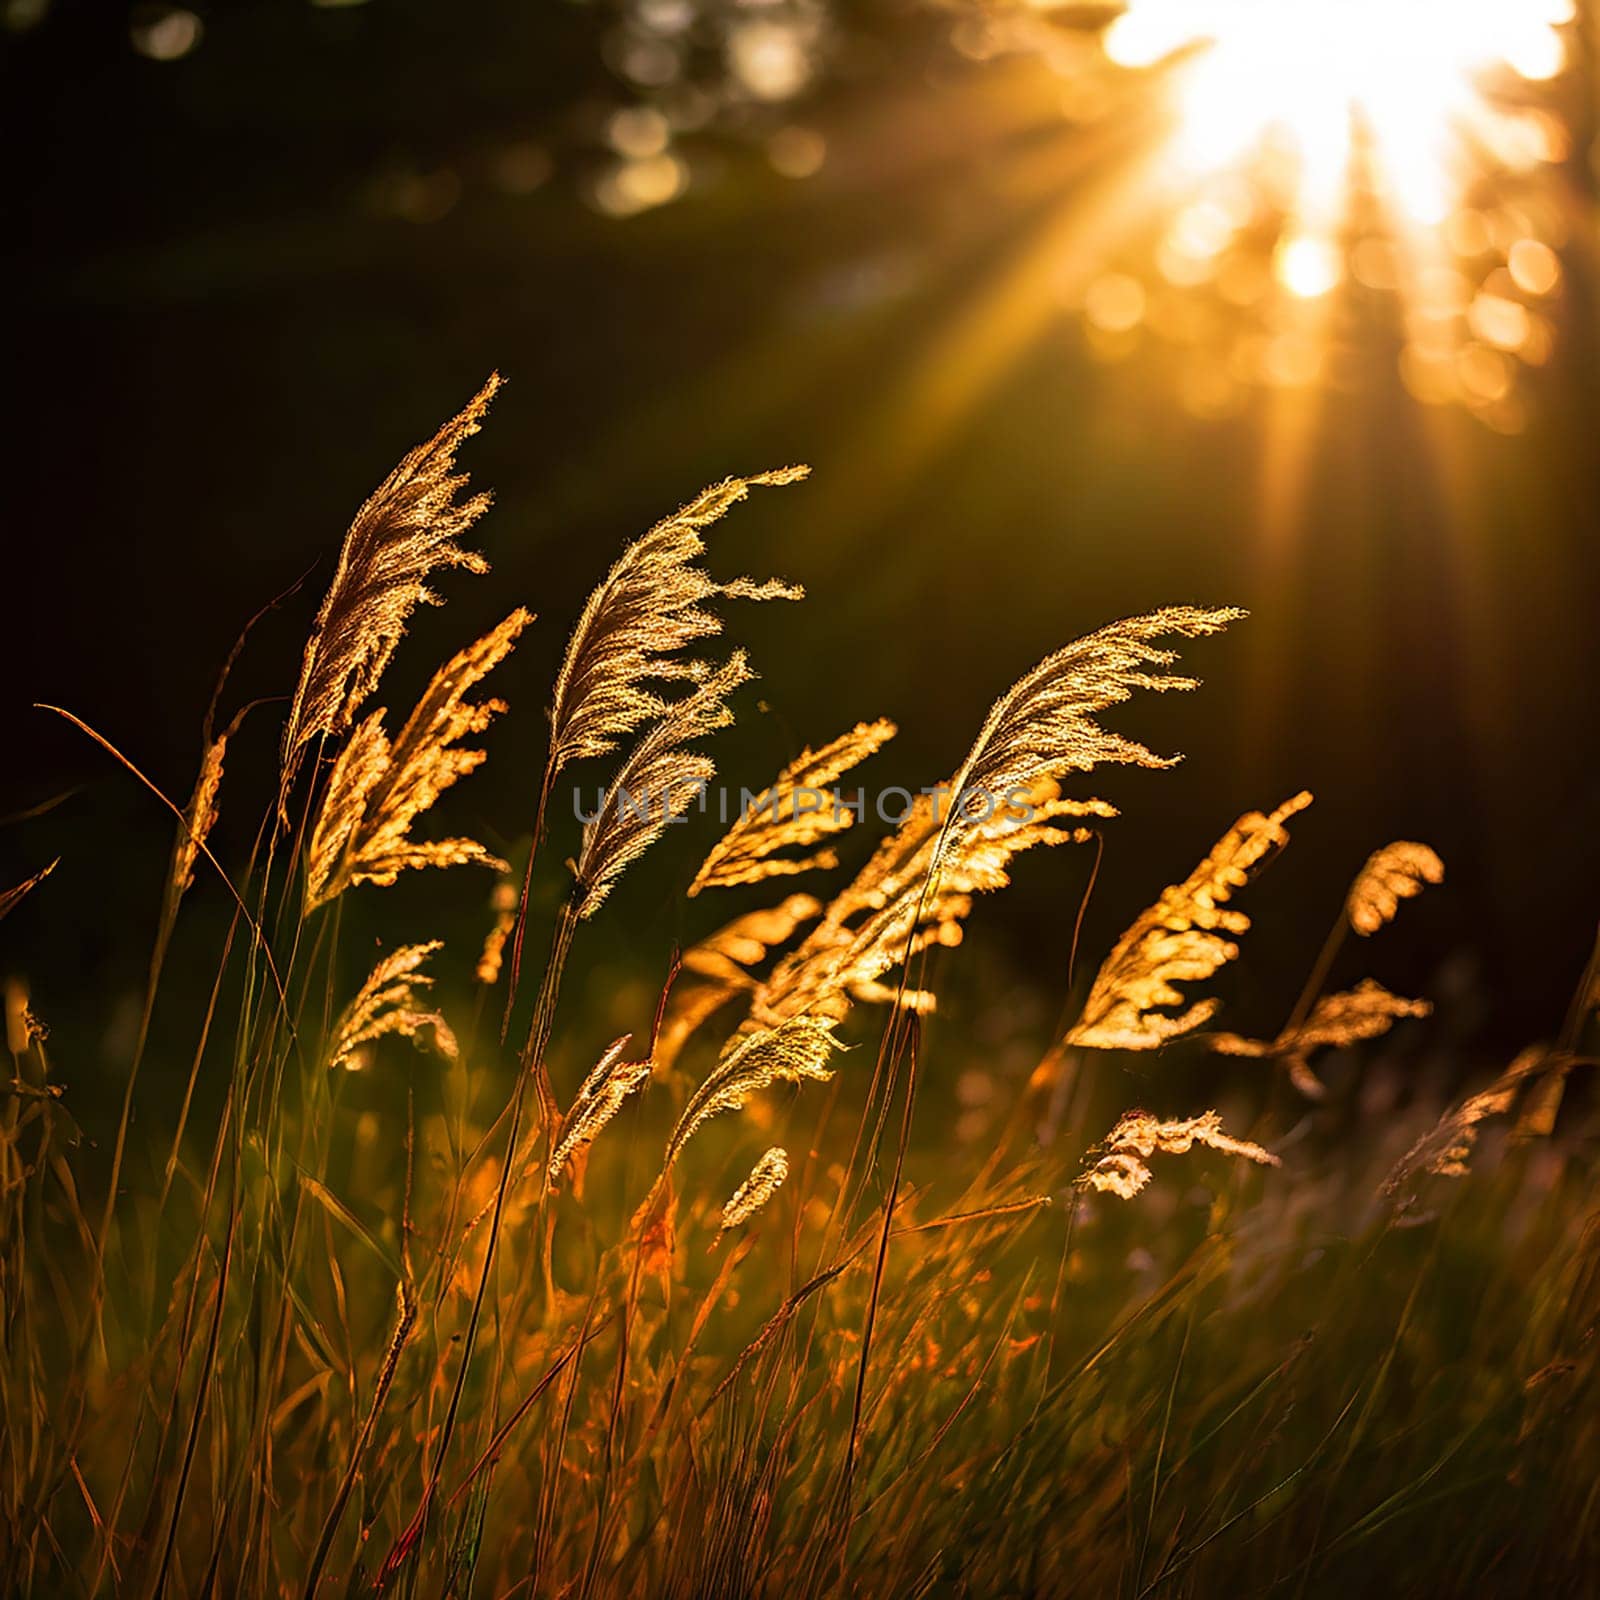 Sun-Kissed Meadow: Wildgrass Bathed in the Warmth of Sunlight by Petrichor